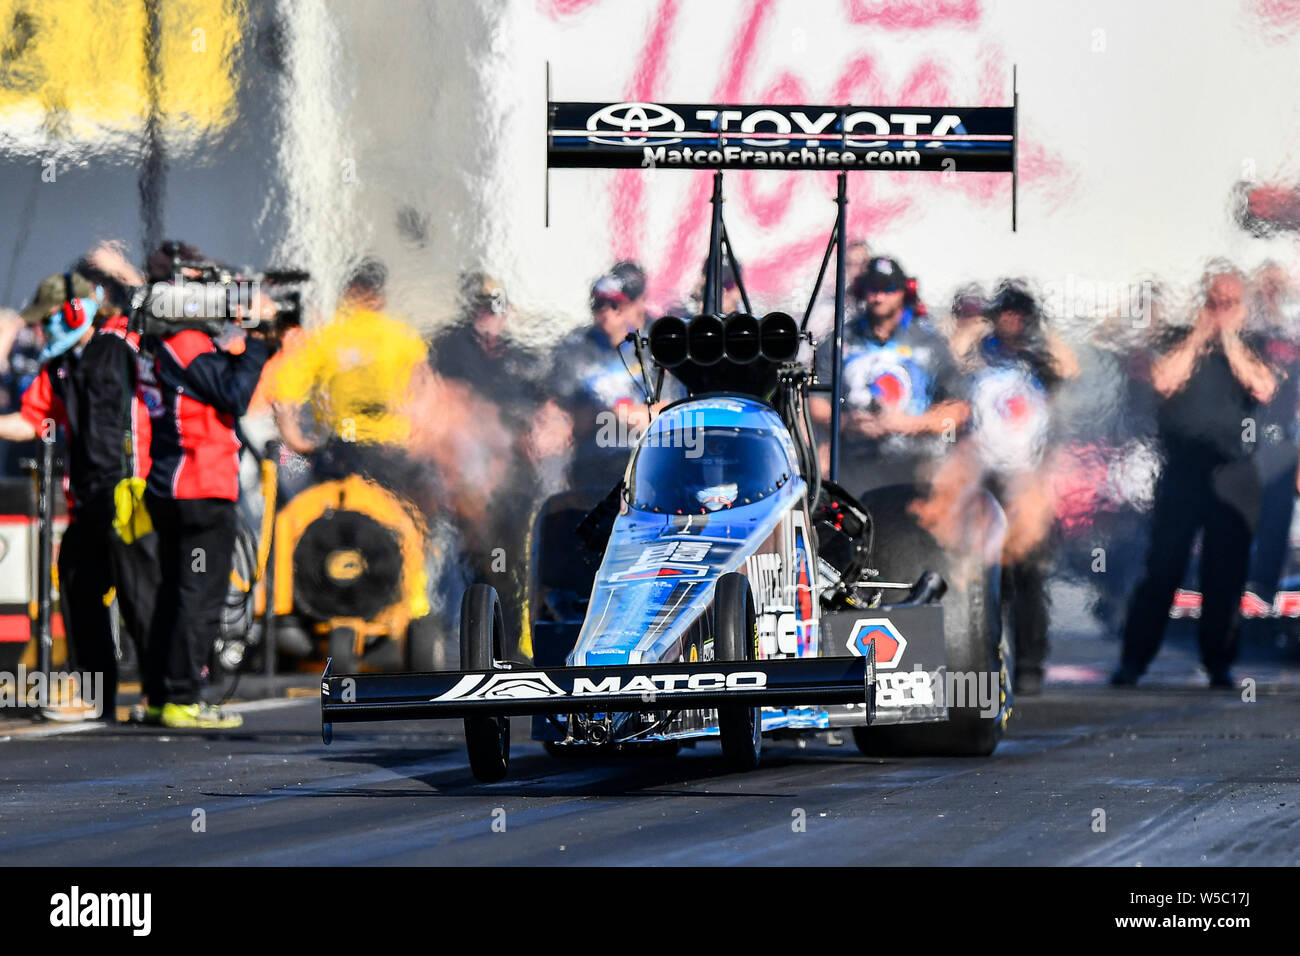 Sonoma, California, USA. 27th July, 2019. Antron Brown latches his top fuel dragster during the NHRA Sonoma Nationals at Sonoma Raceway in Sonoma, California. Chris Brown/CSM/Alamy Live News Stock Photo